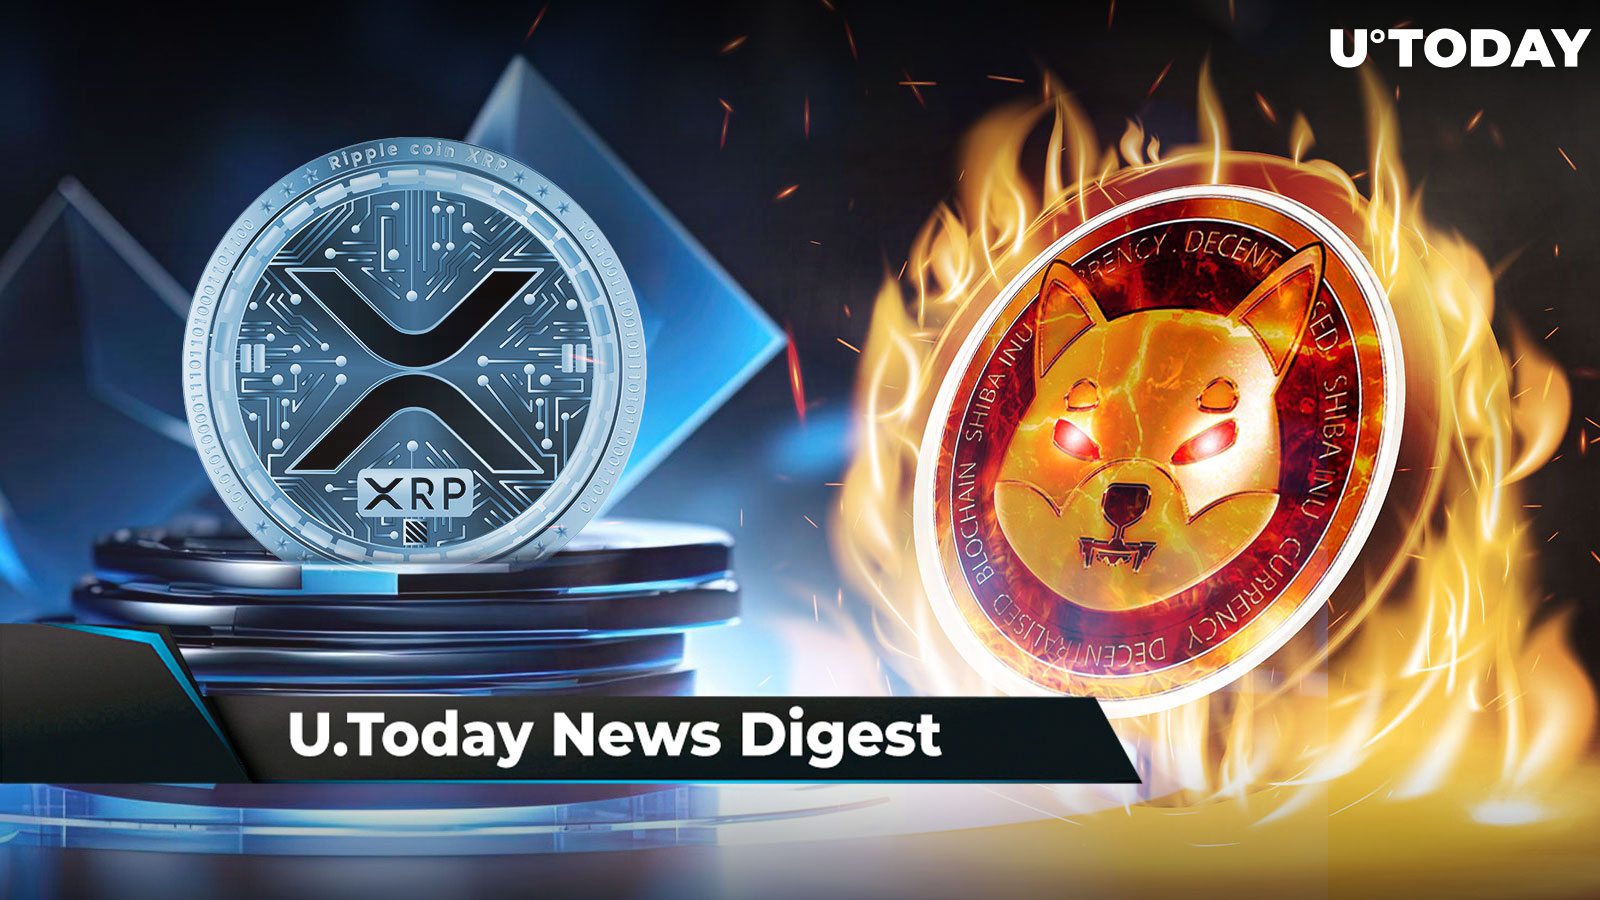 SHIB Burns Skyrocket 2,076%, Three XRP Price Levels to Keep Eye On, Nearly $500 Million in Ethereum Moved to Justin Sun-Linked Wallet: Crypto News Digest by U.Today